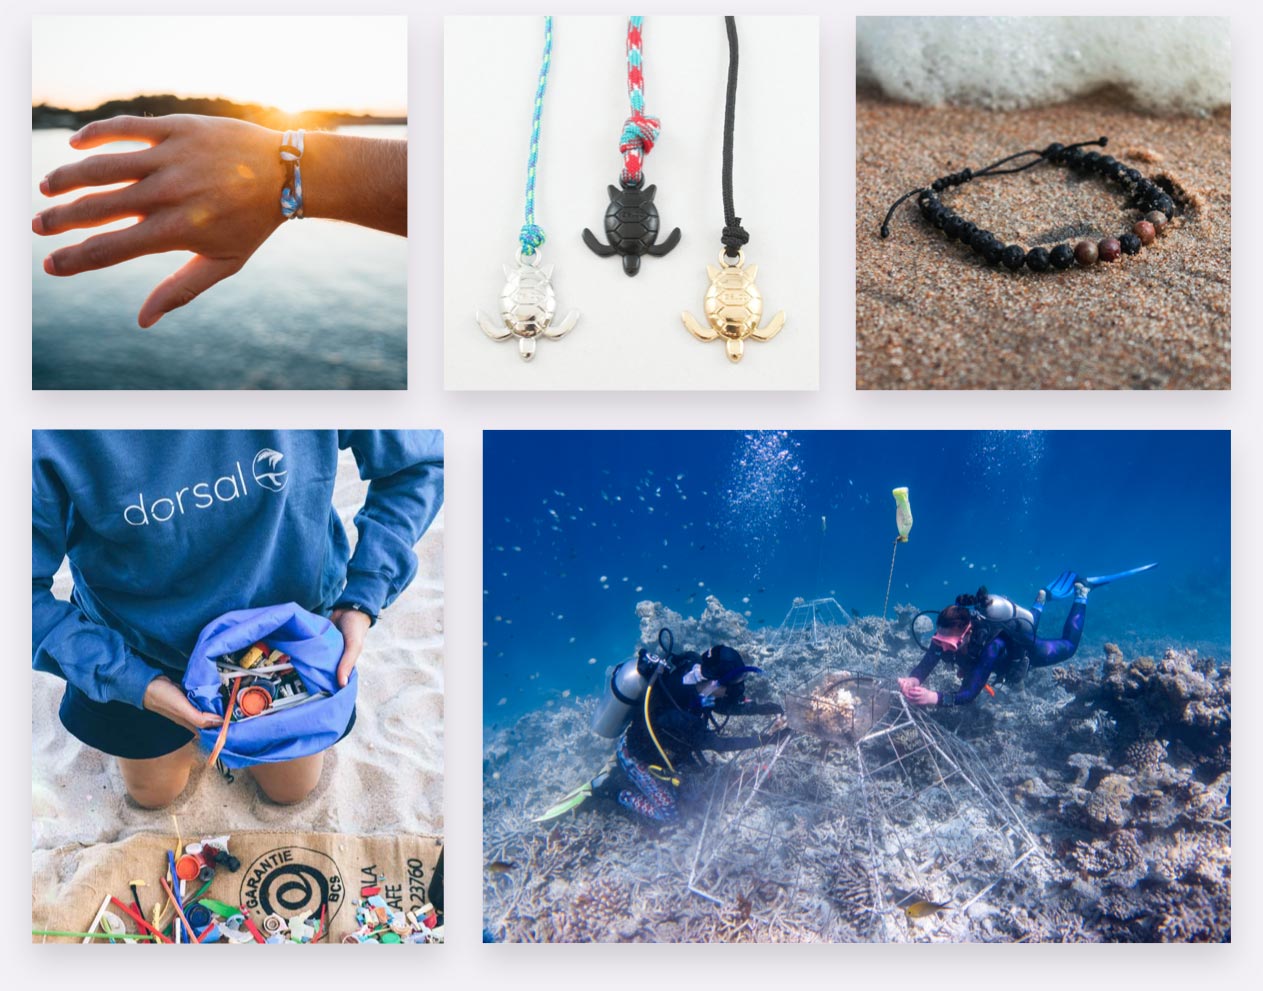 Dorsal brand imagery, products, cleaning beaches, coral restoration